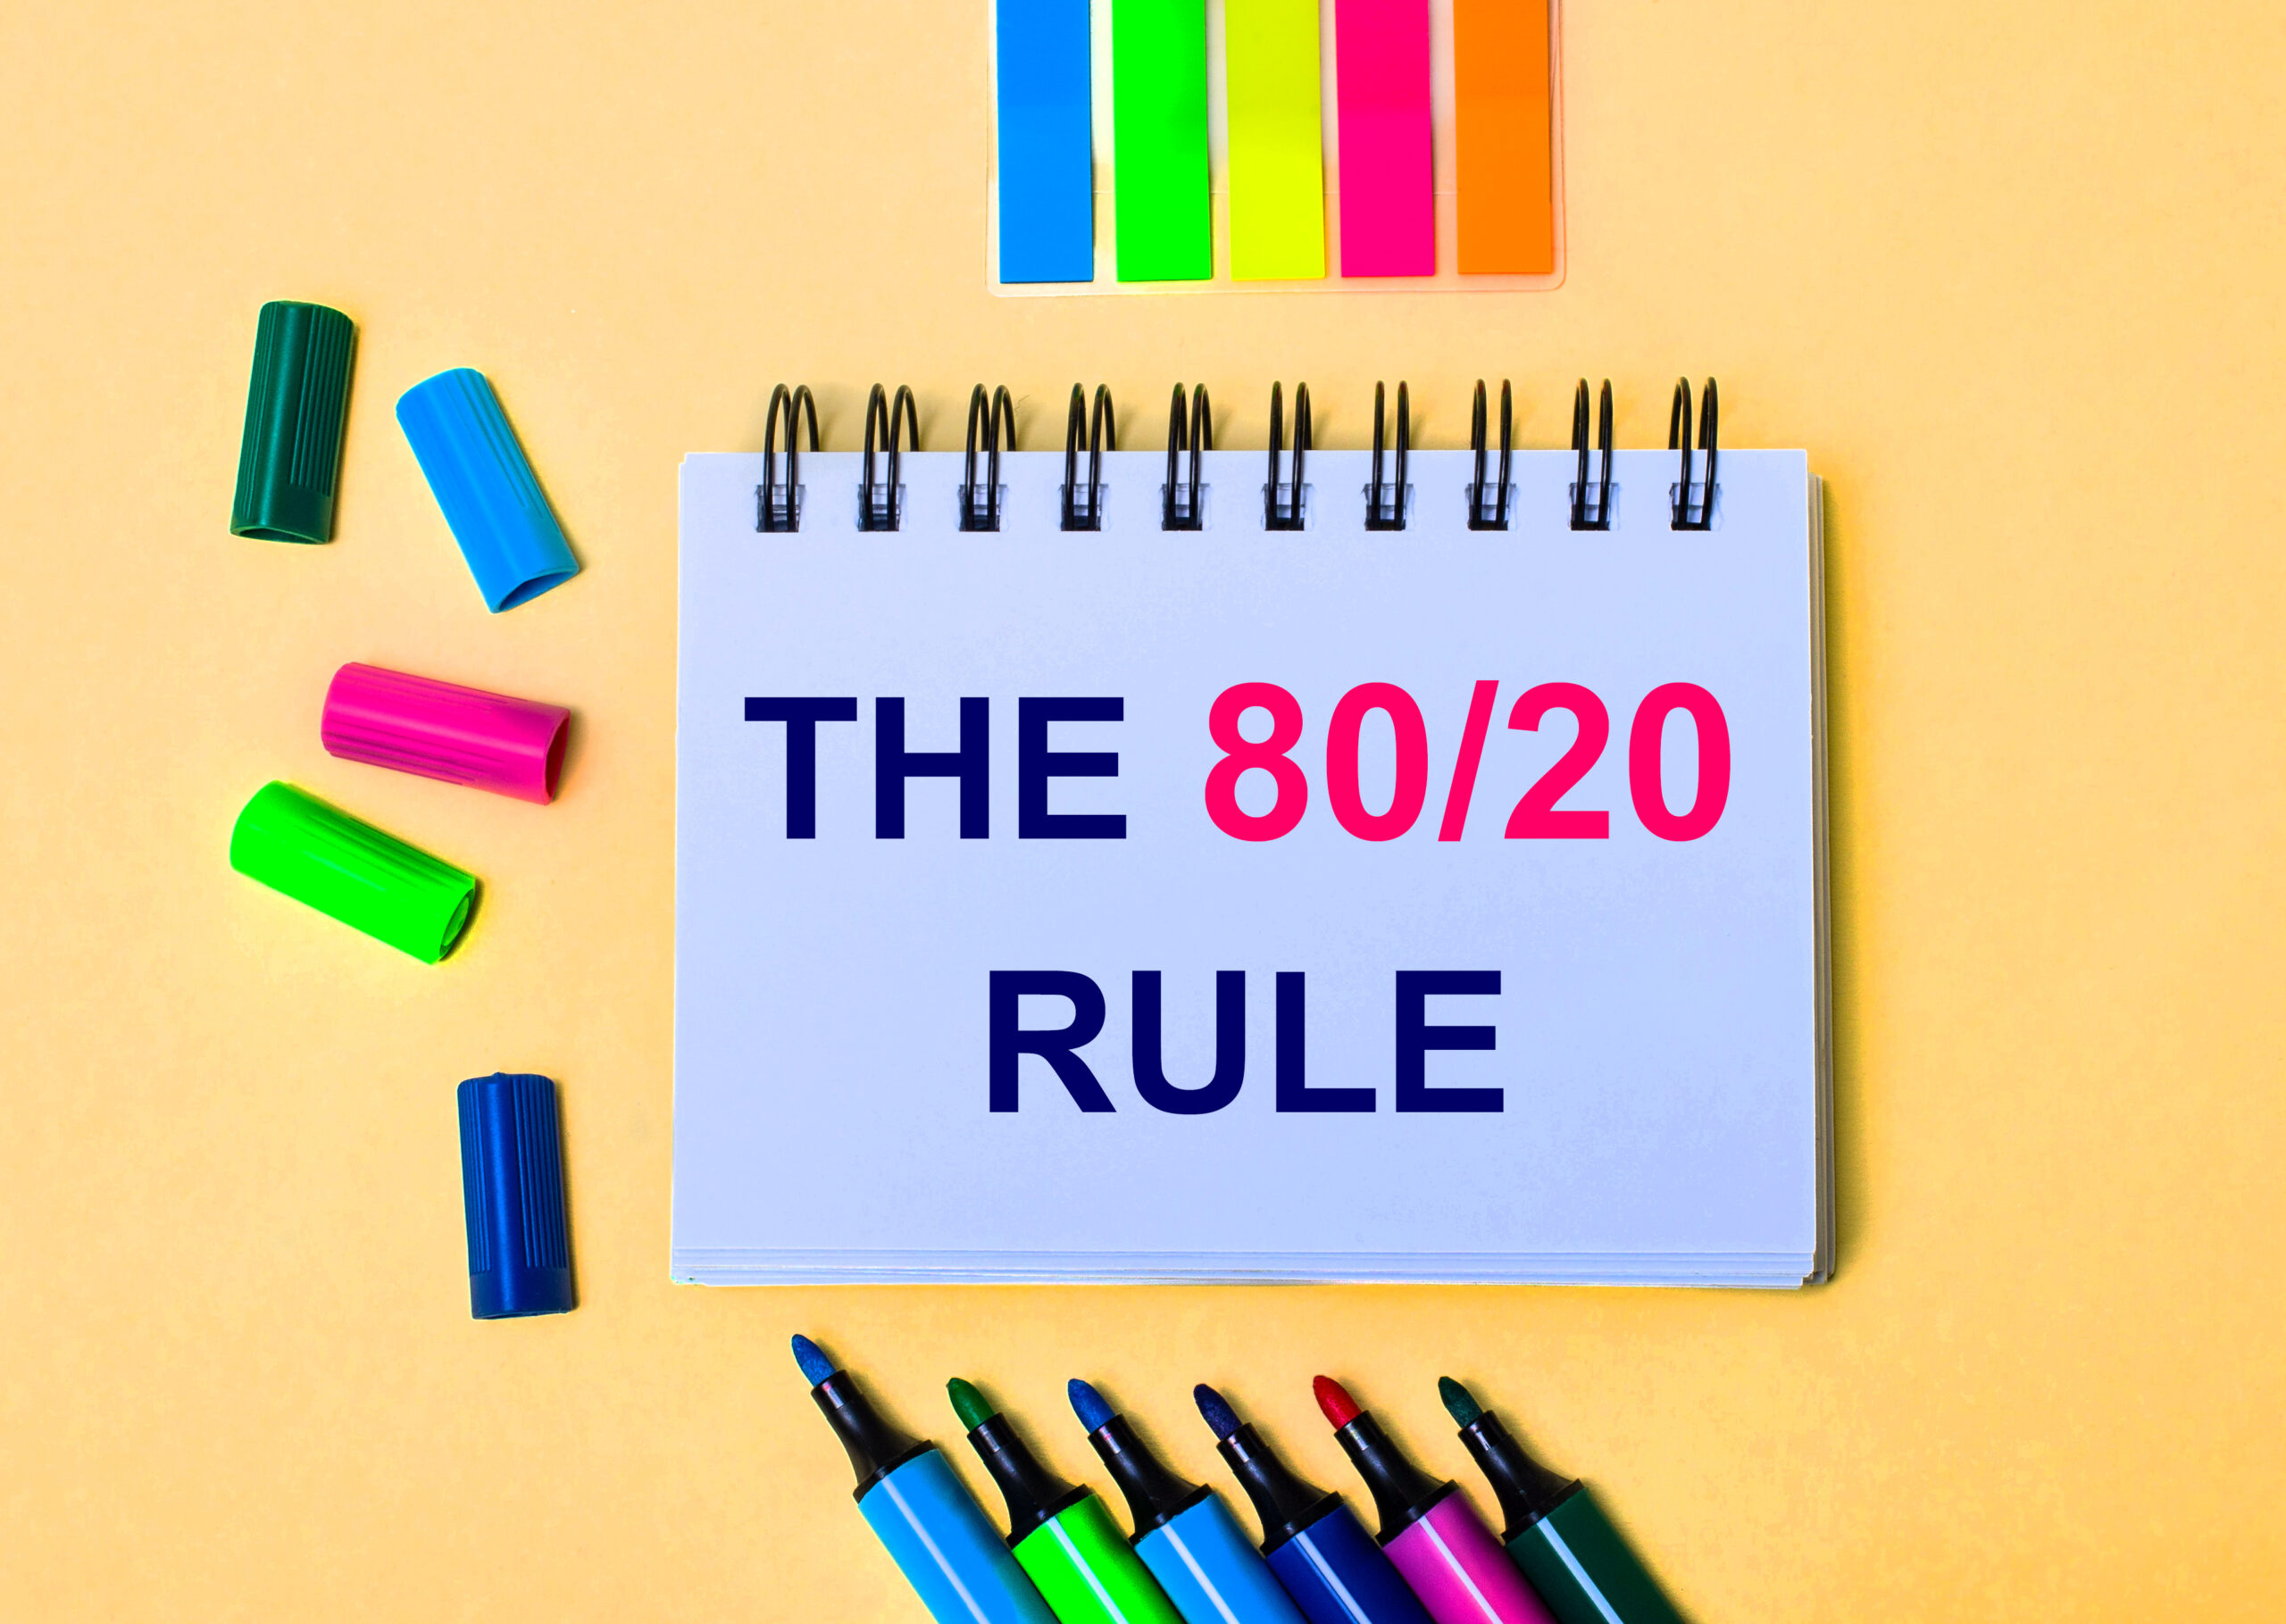 The 80/20 rule